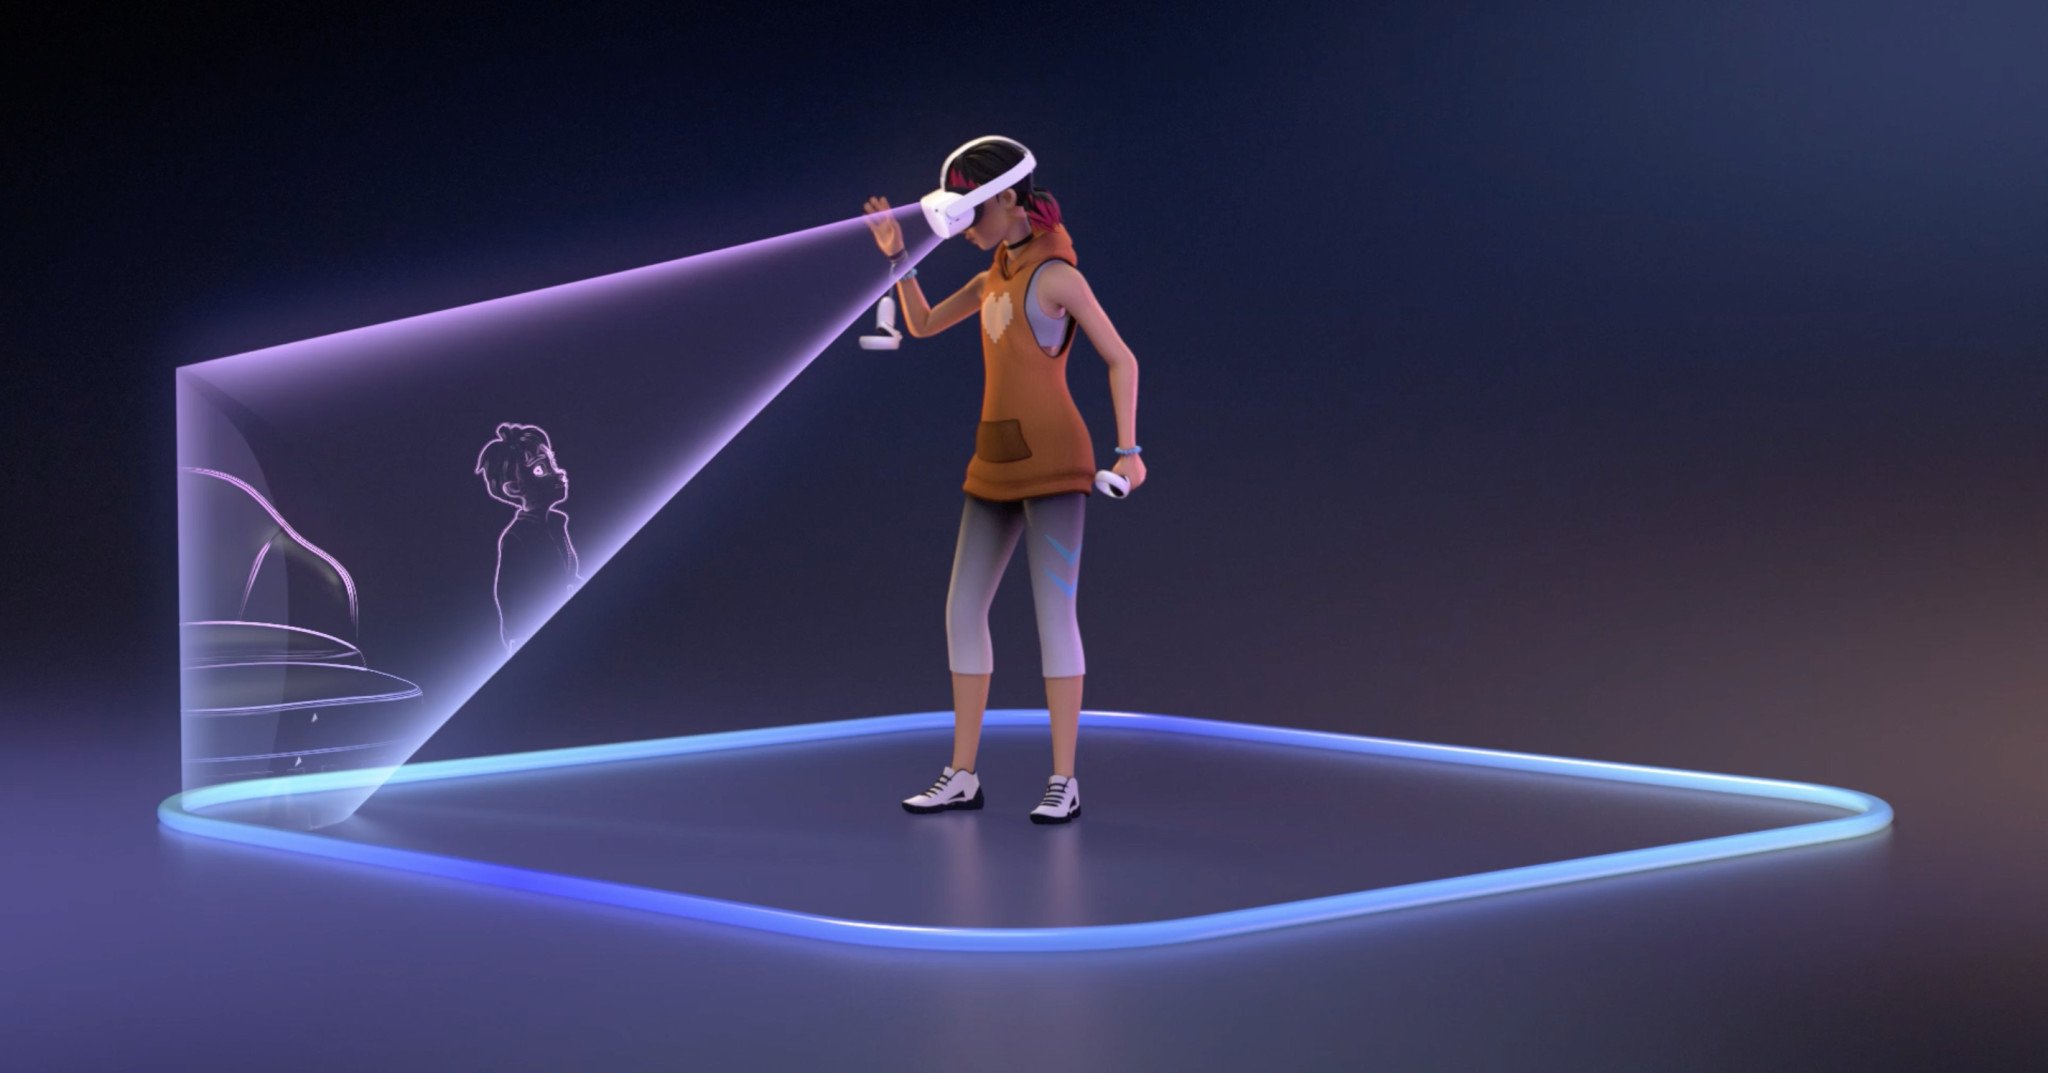 Oculus Quest update adds Space Sense and Android phone notifications